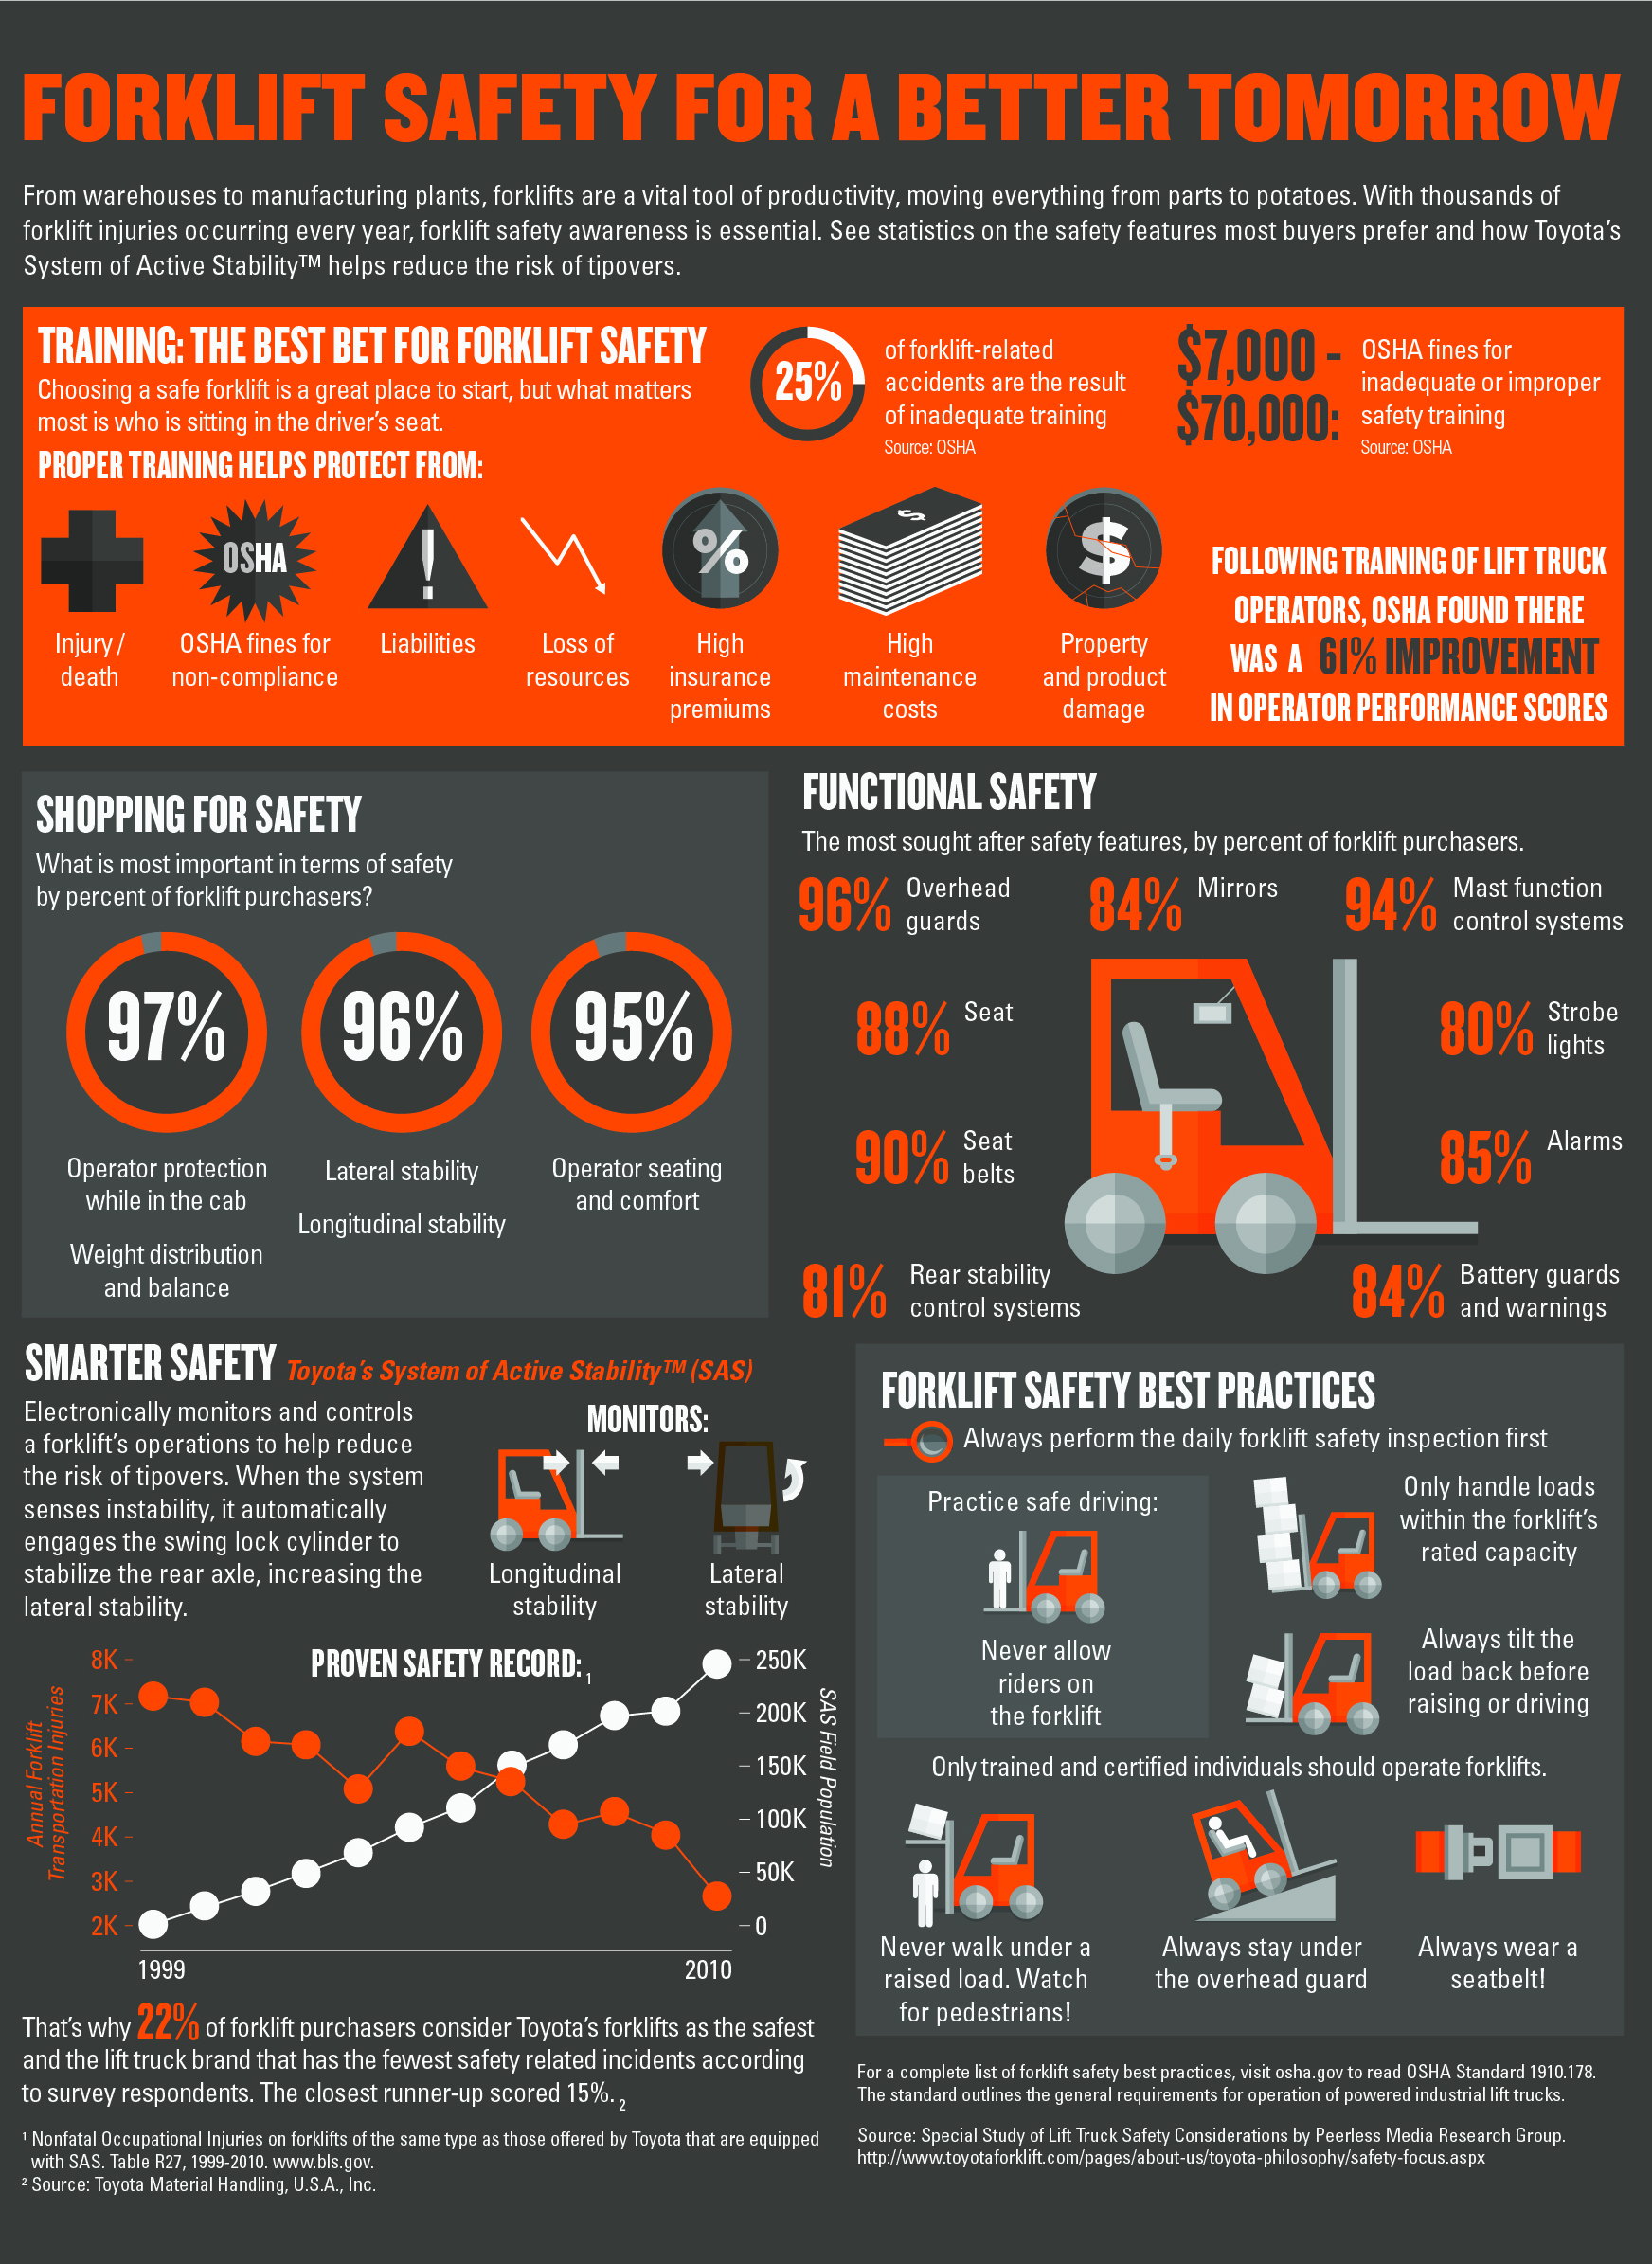 Toyota Forklift Safety Infographic